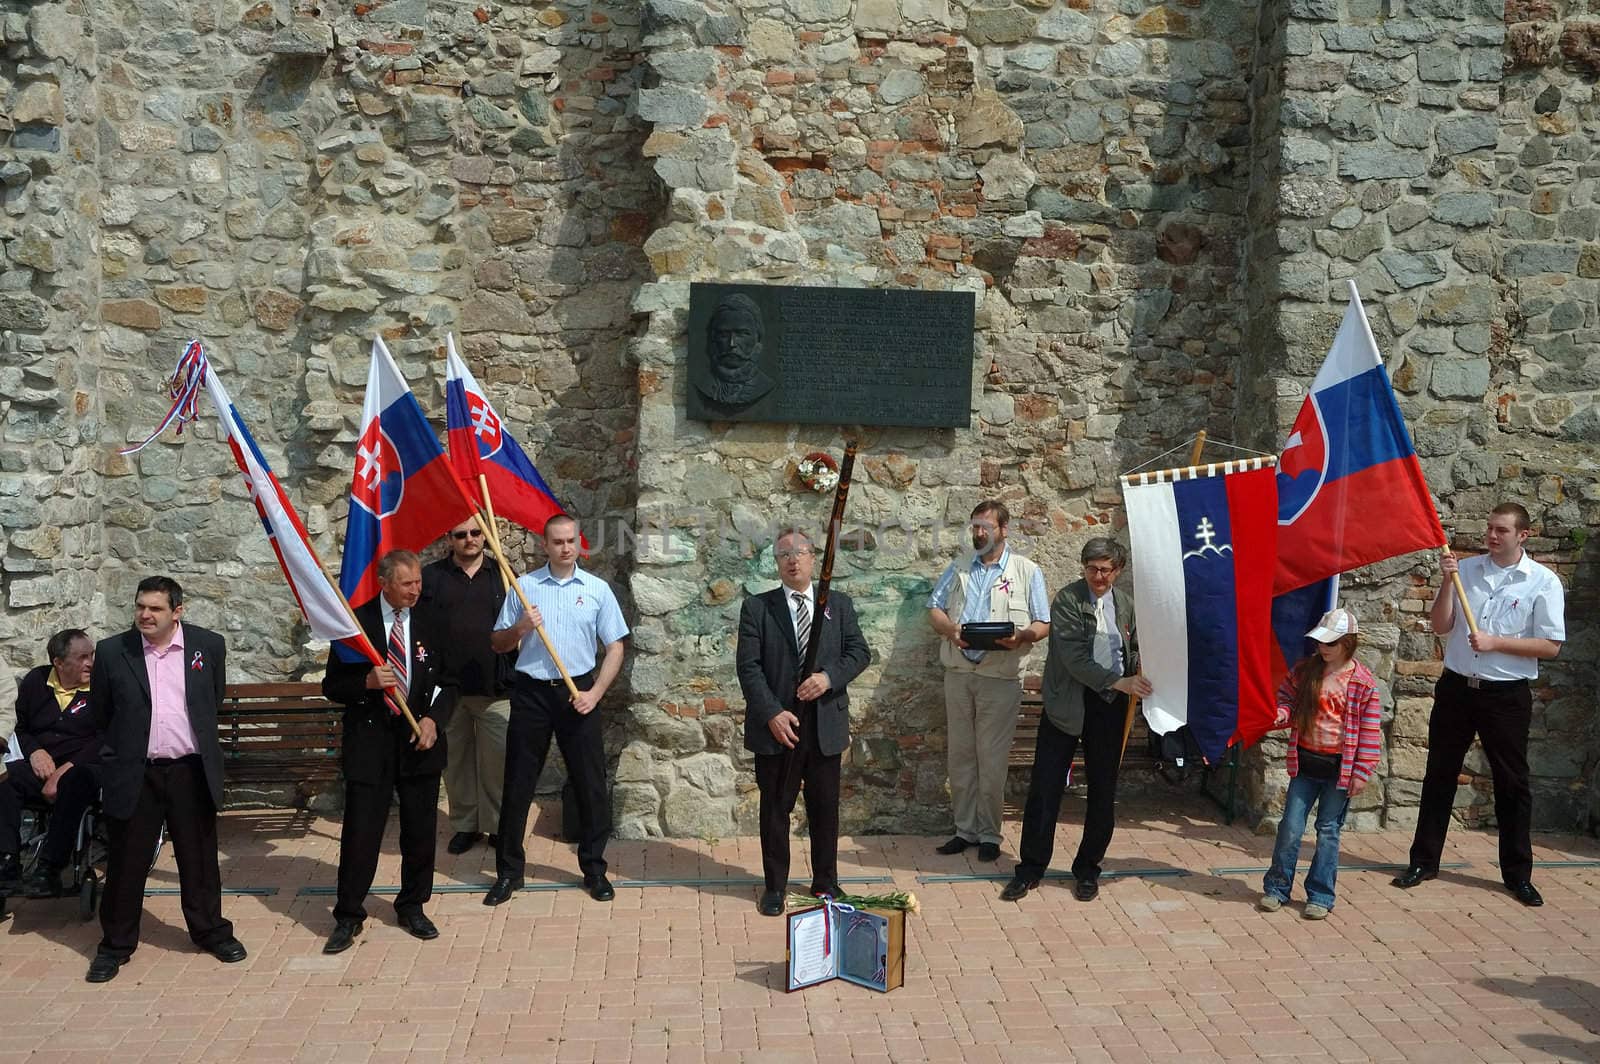 slovak patriotic annual meeting at castle Devin ruins, association called 'Matica Slovenska', memory board of Ludovit Stur in background